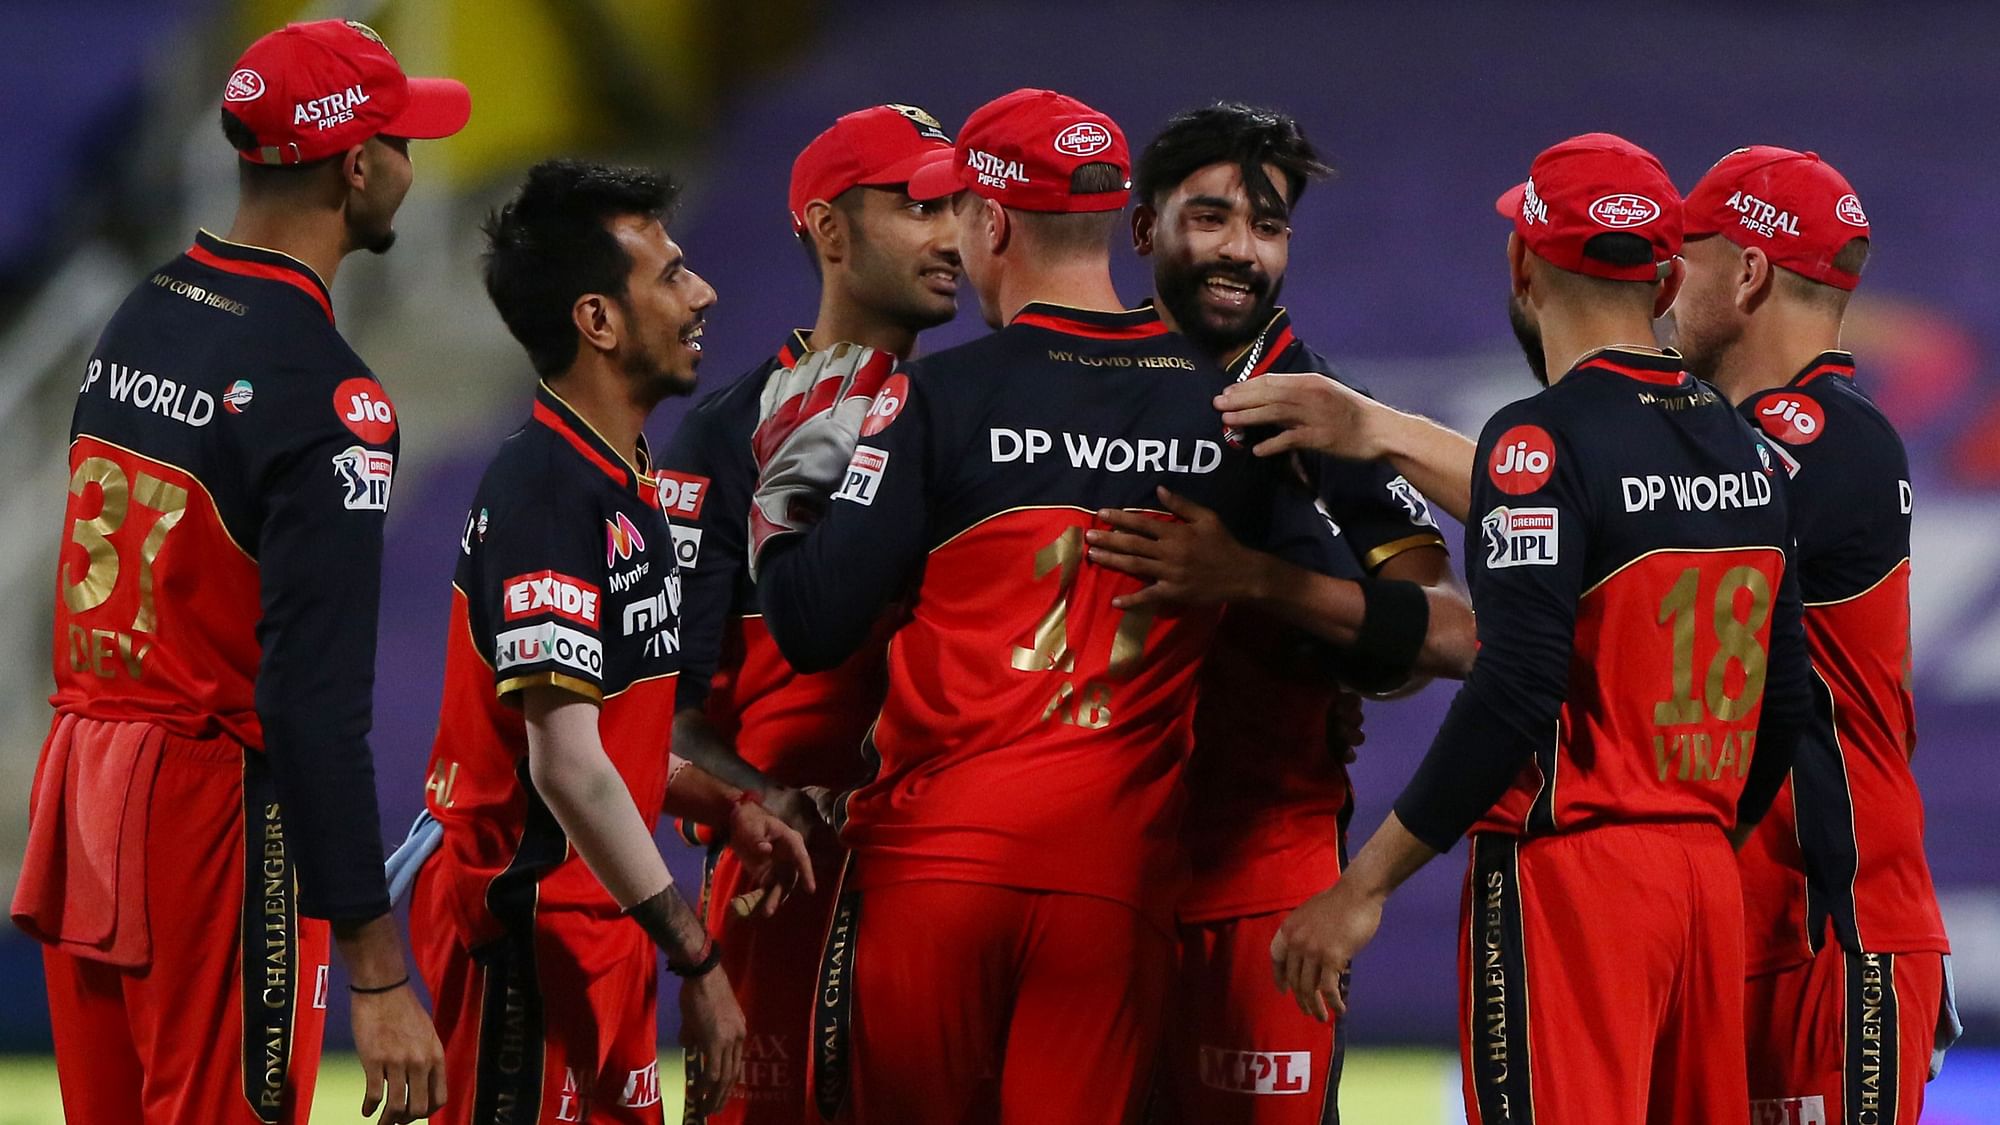 RCB registered an 8 wicket win over KKR on Wednesday, moving to the second spot in the points table.